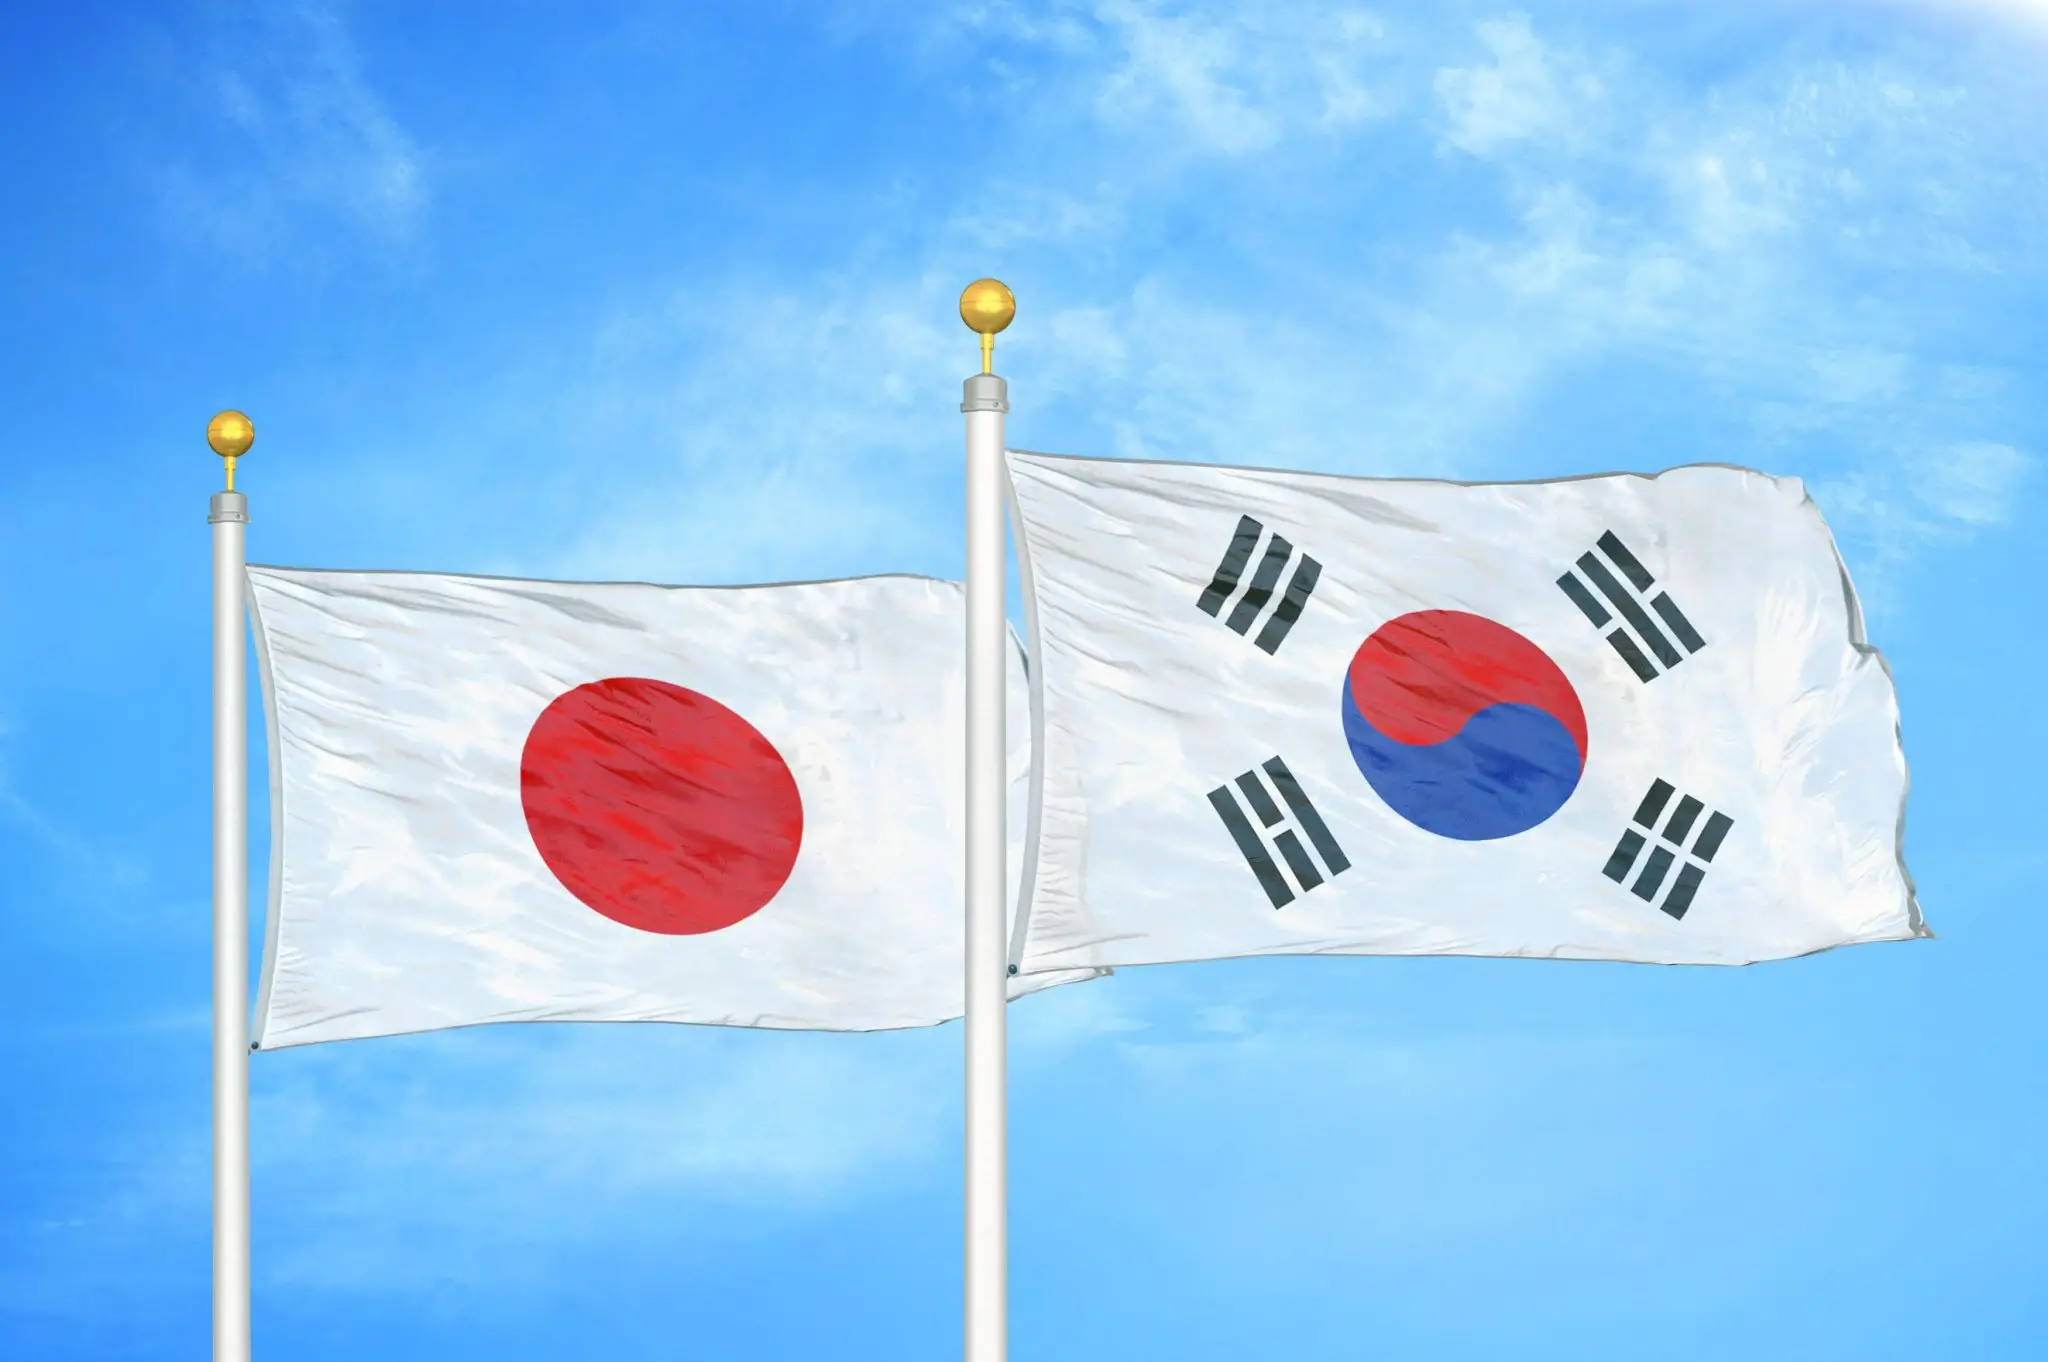 Japan-South Korea Relations: Tensions and diplomatic efforts between these nations